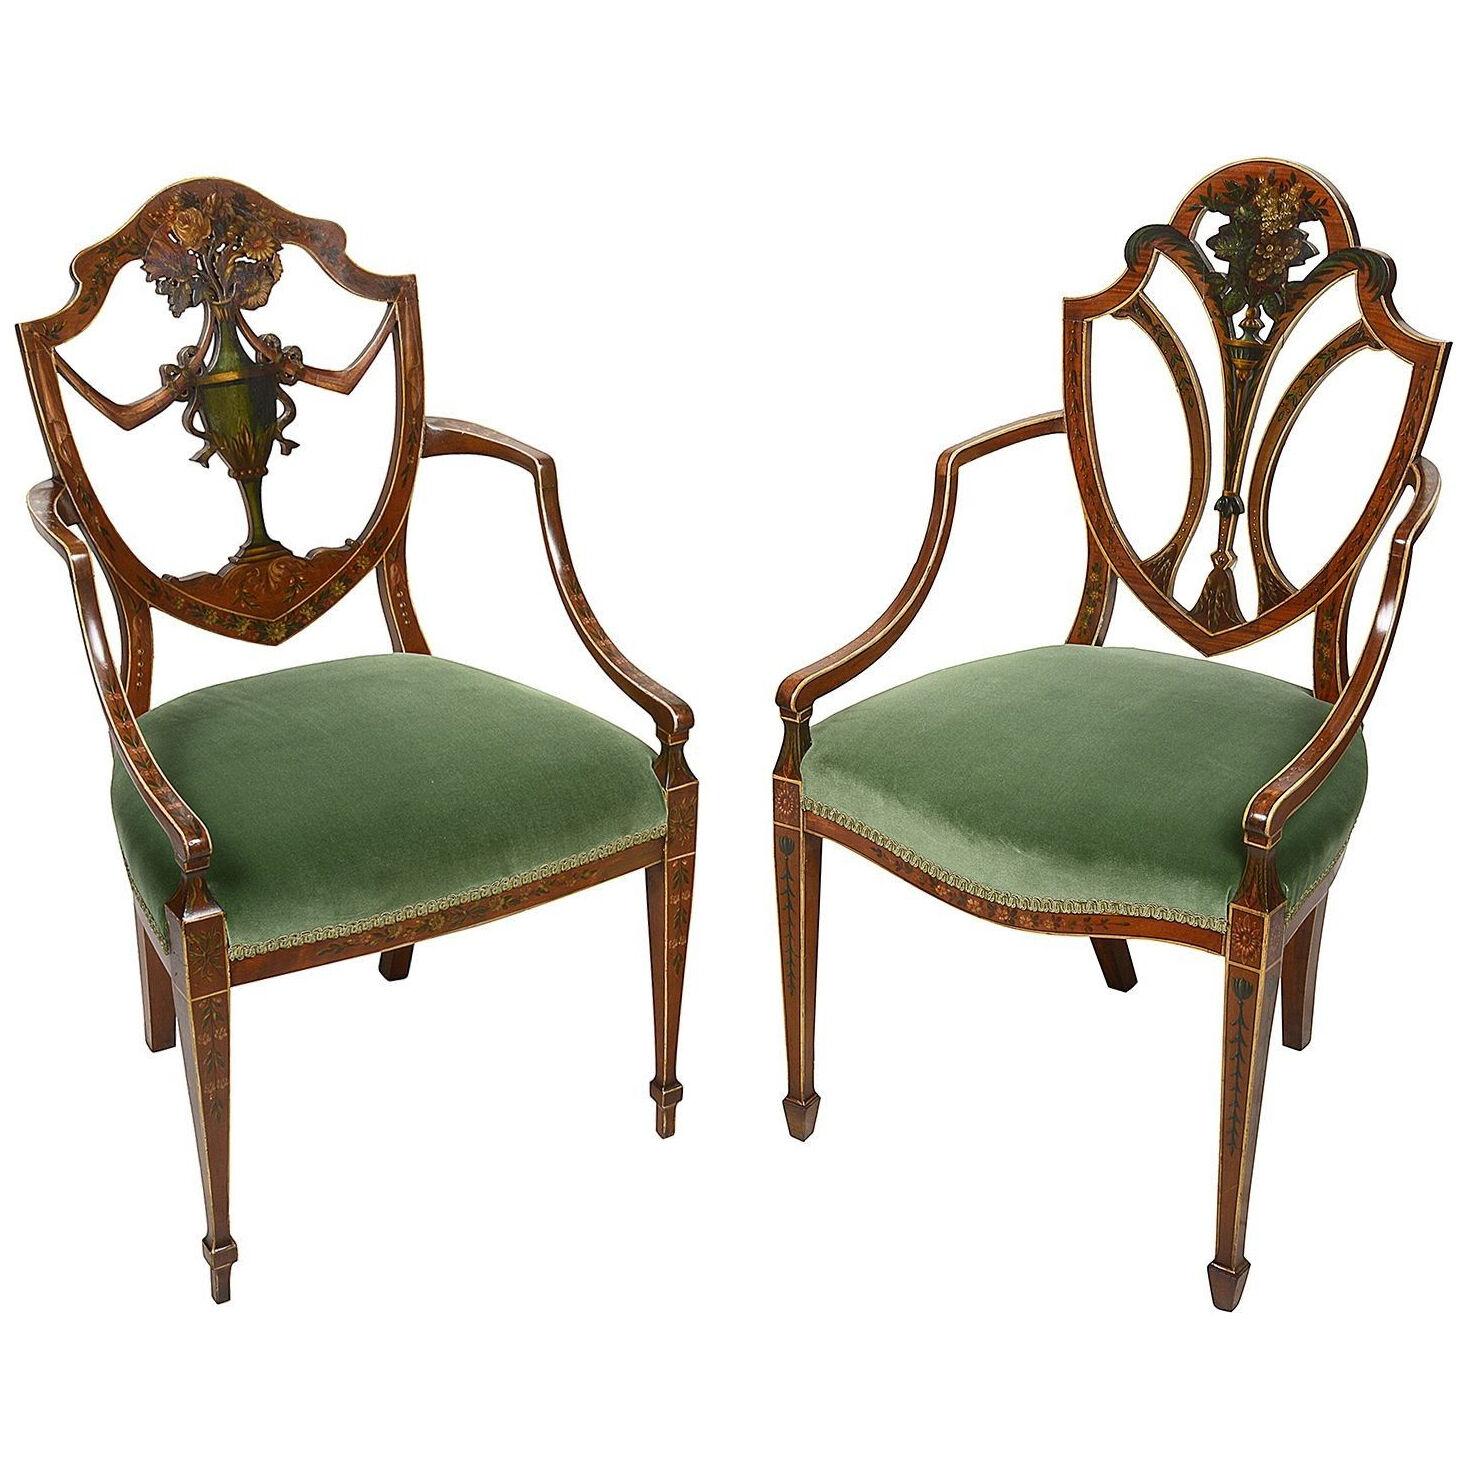 Two 19th Century Sheraton style arm chairs